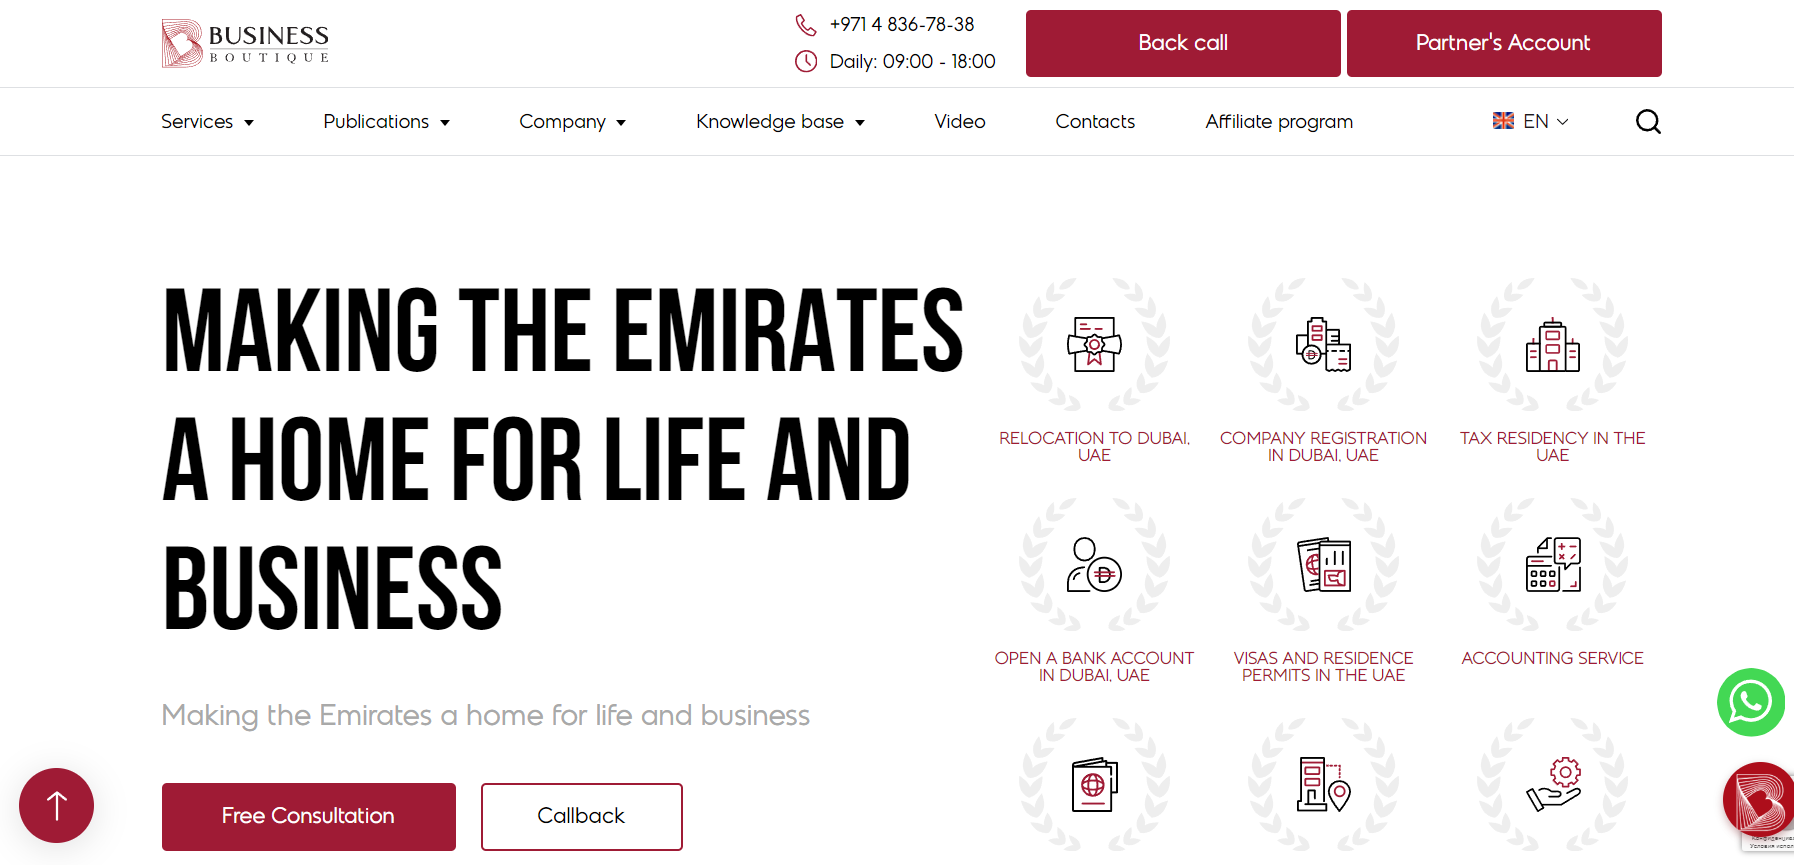 Review of Working with Business Boutique in Dubai: A Warning for Entrepreneurs